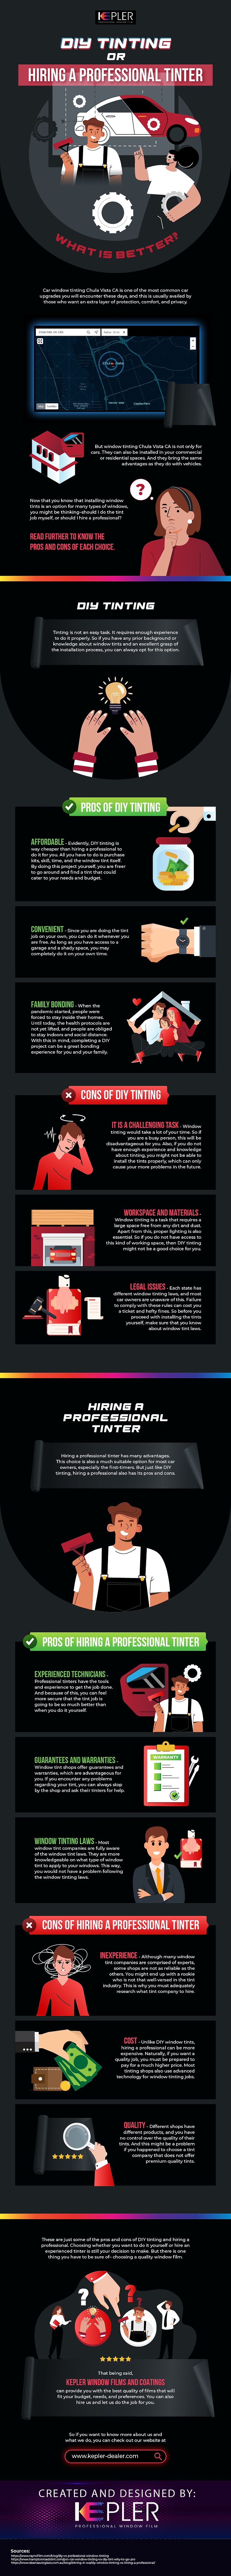 DIY Tinting or Hiring a Professional Tinter: What is Better - Infographics